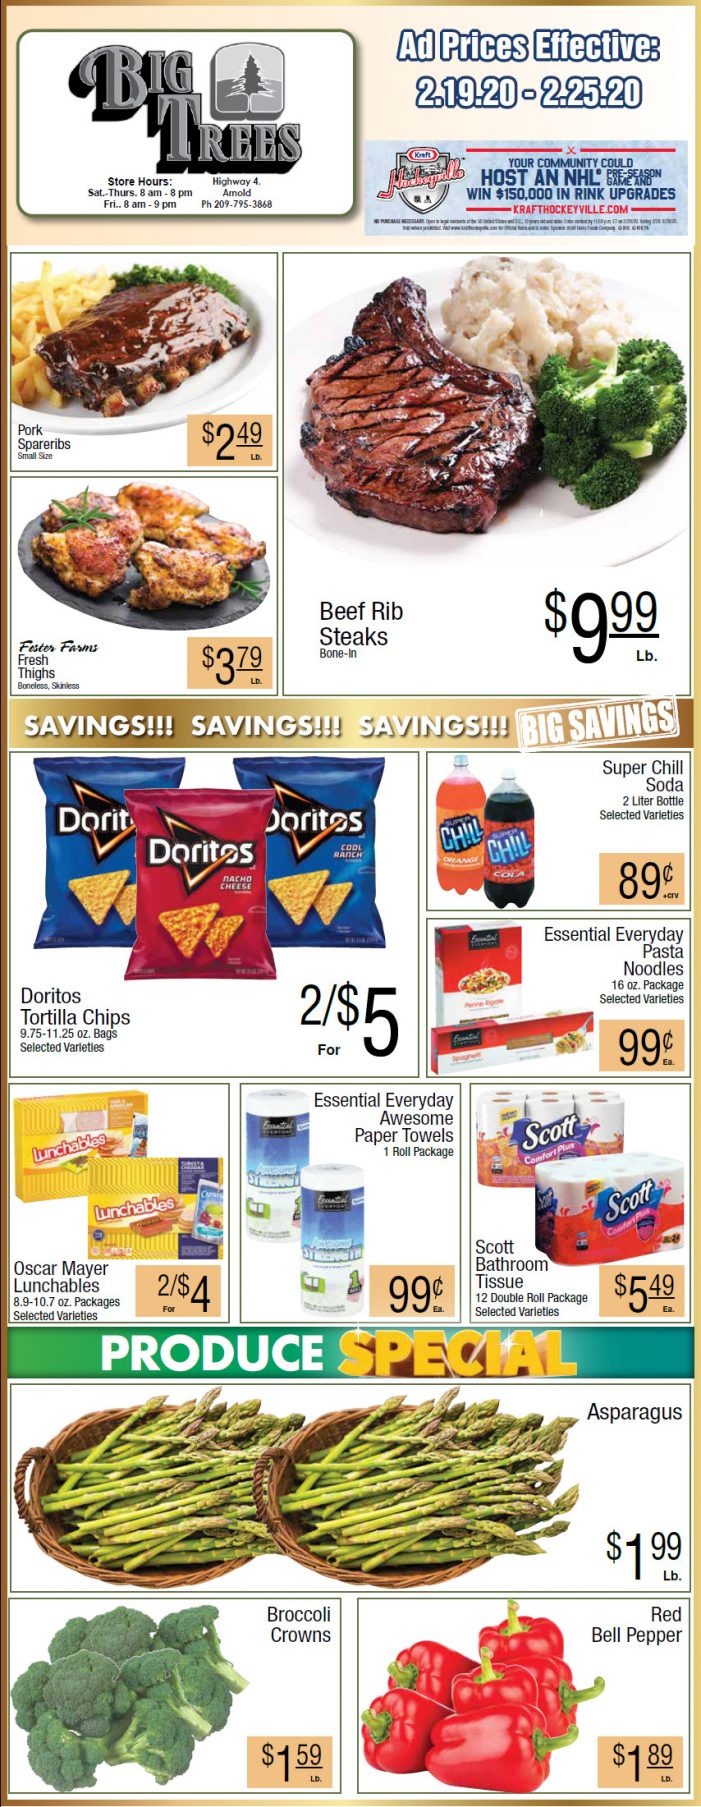 Big Trees Market Weekly Ad & Grocery Specials Through February 25th